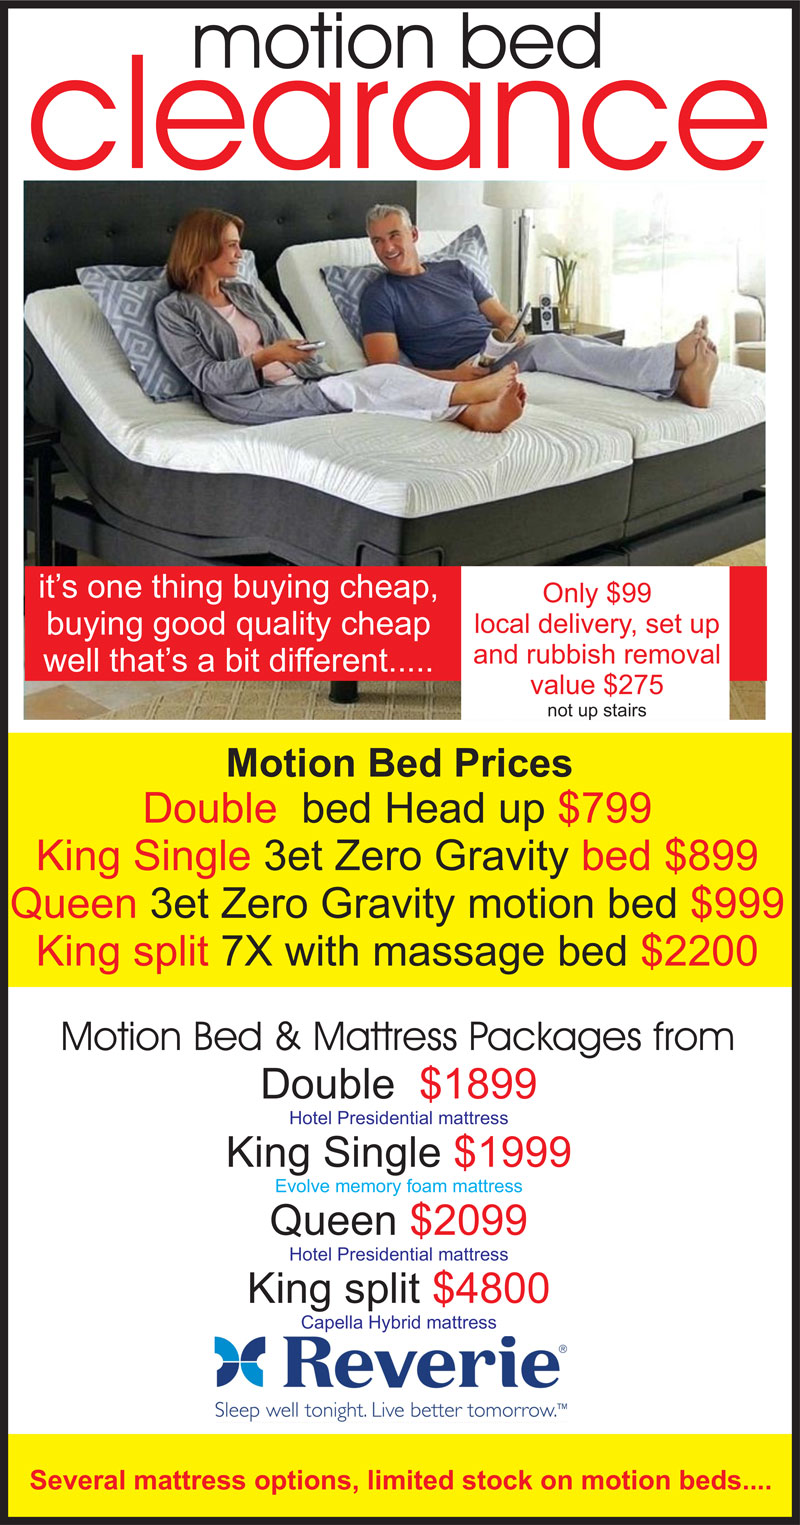 Motion Bed Clearance - Great Deals on Quality Motion Beds